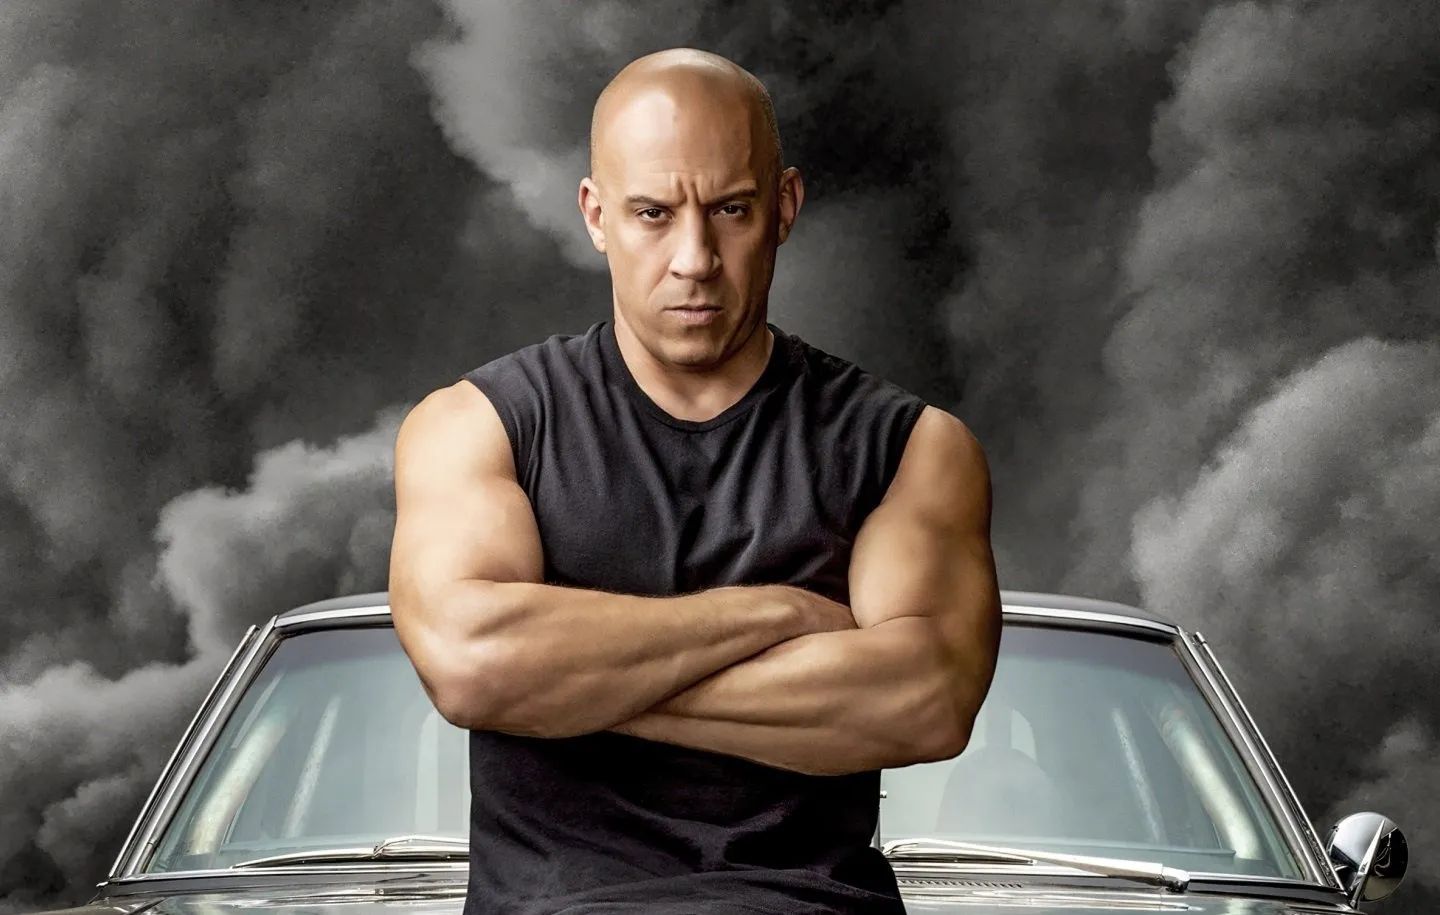 Vin Diesel from Fast and Furious accused of sexual abuse He denies the charges